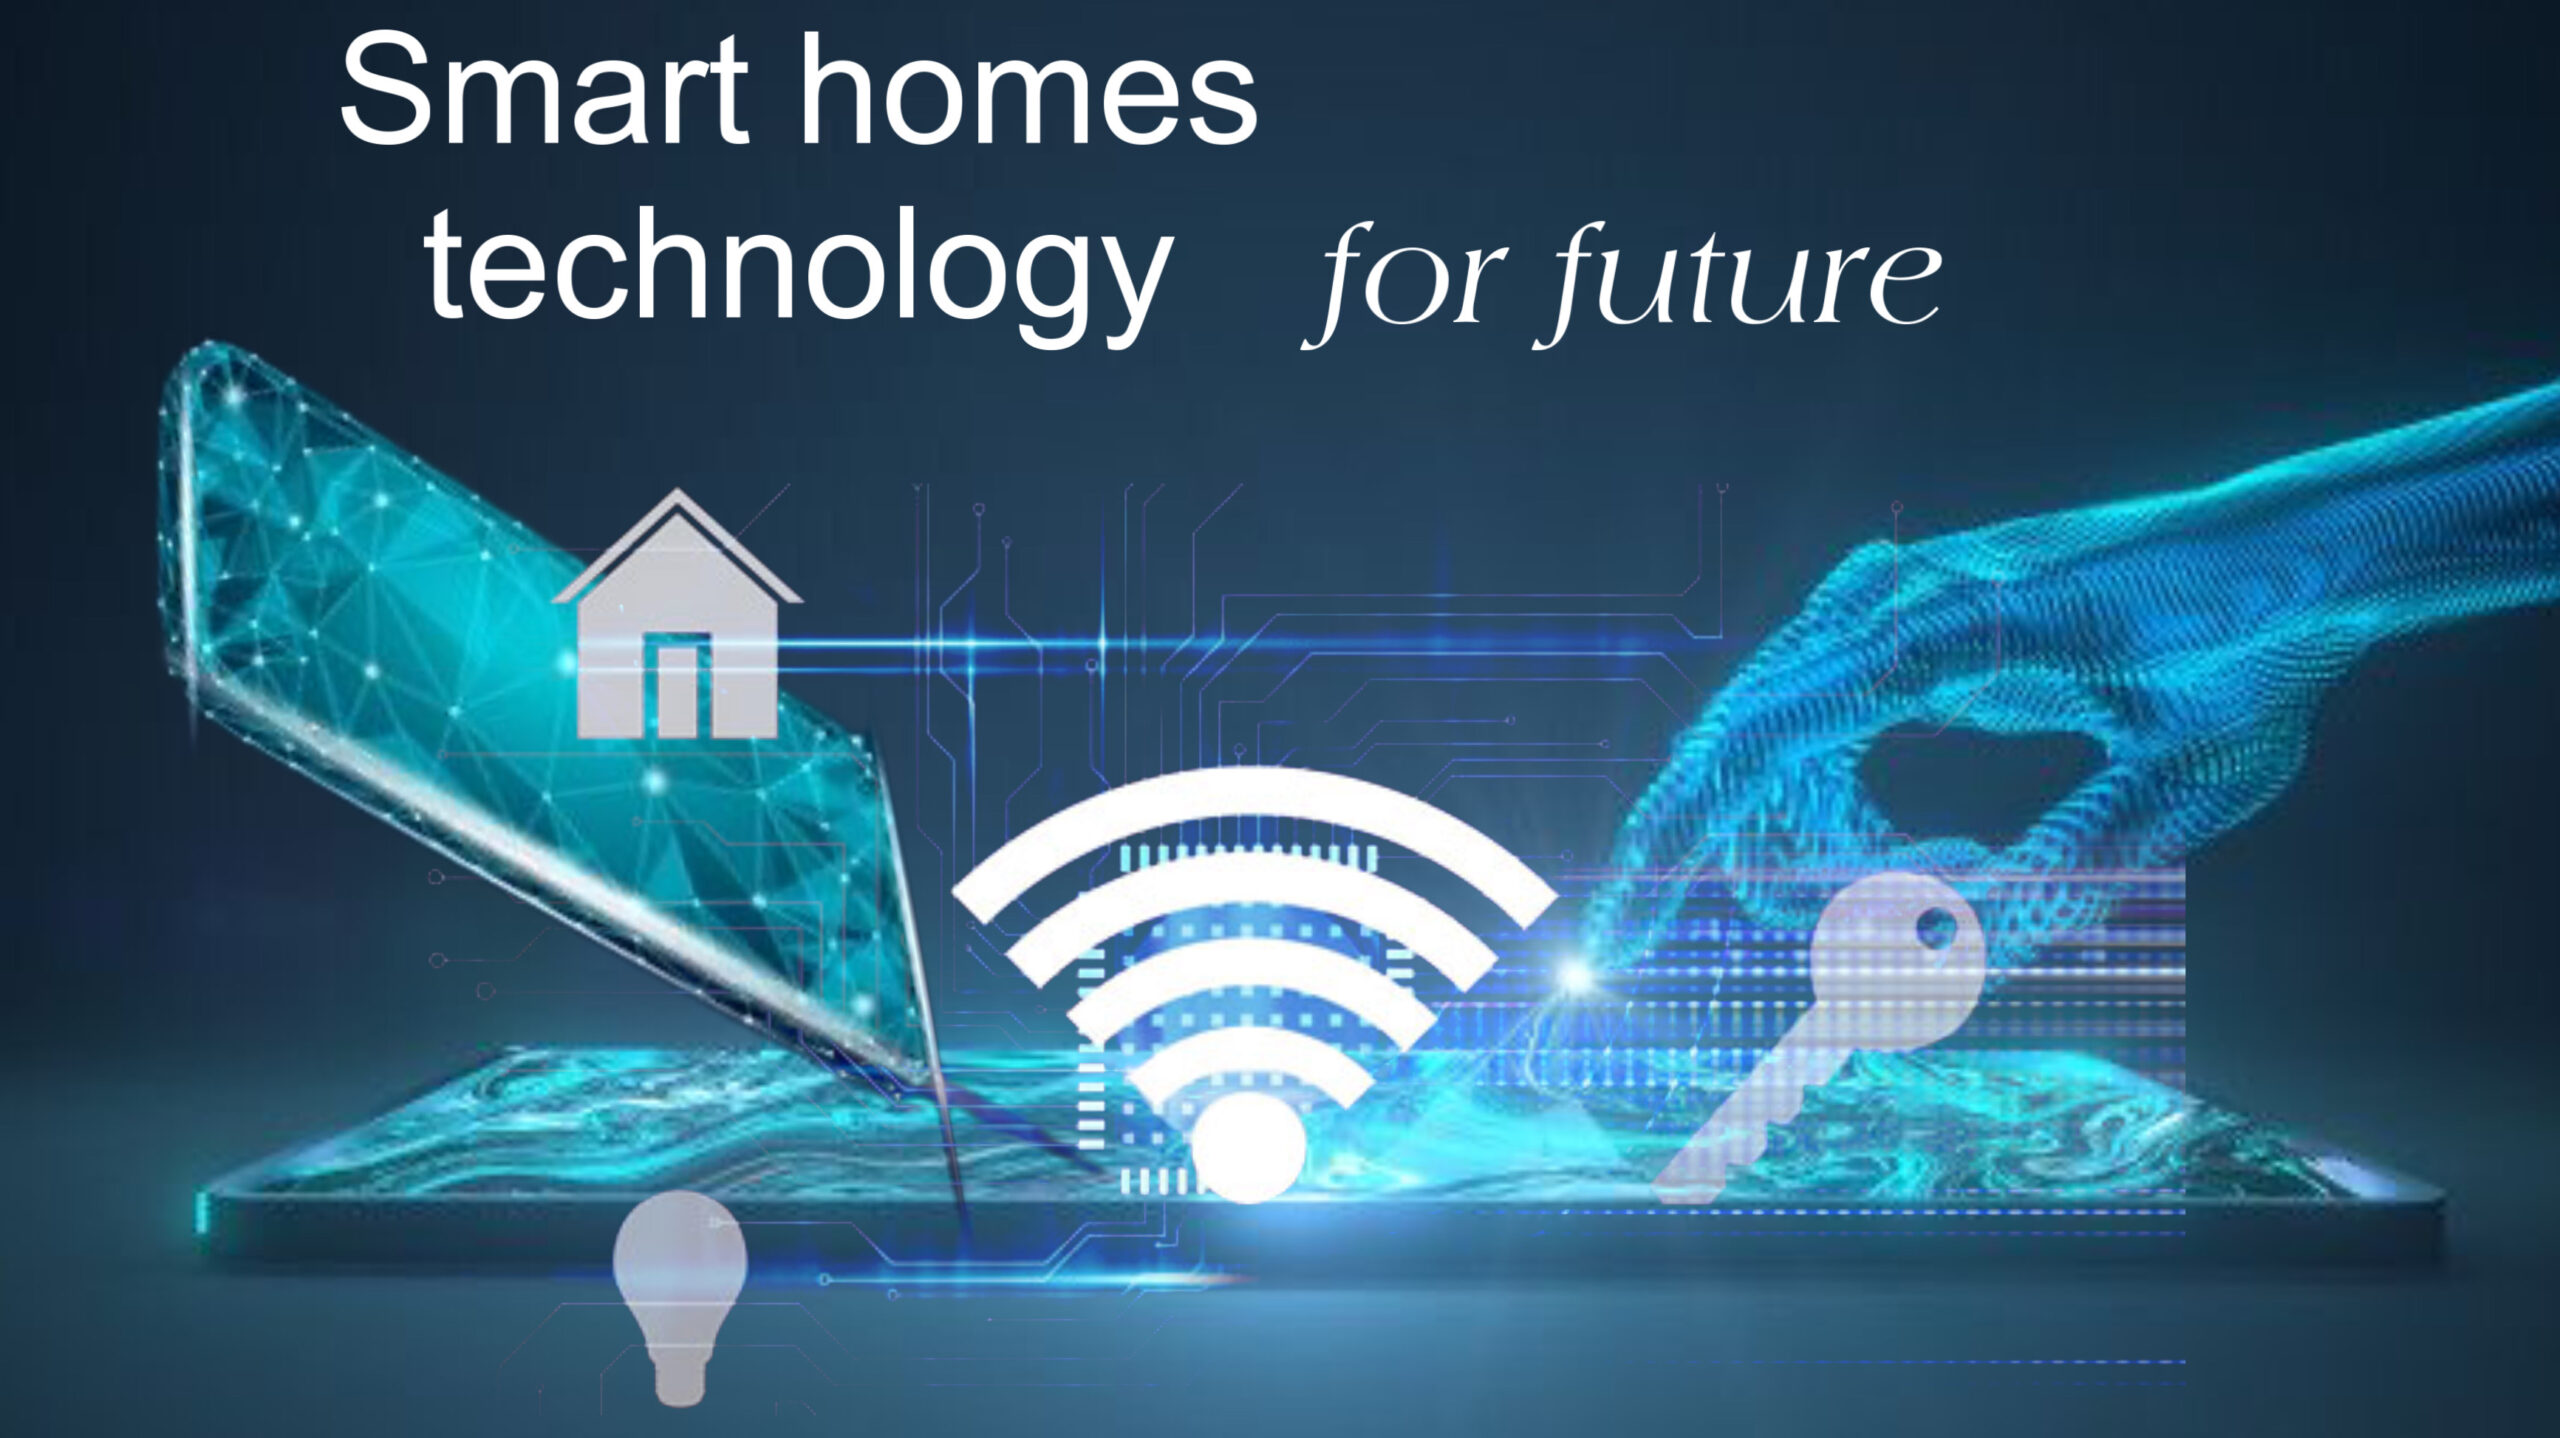 Smart homes technology of the future